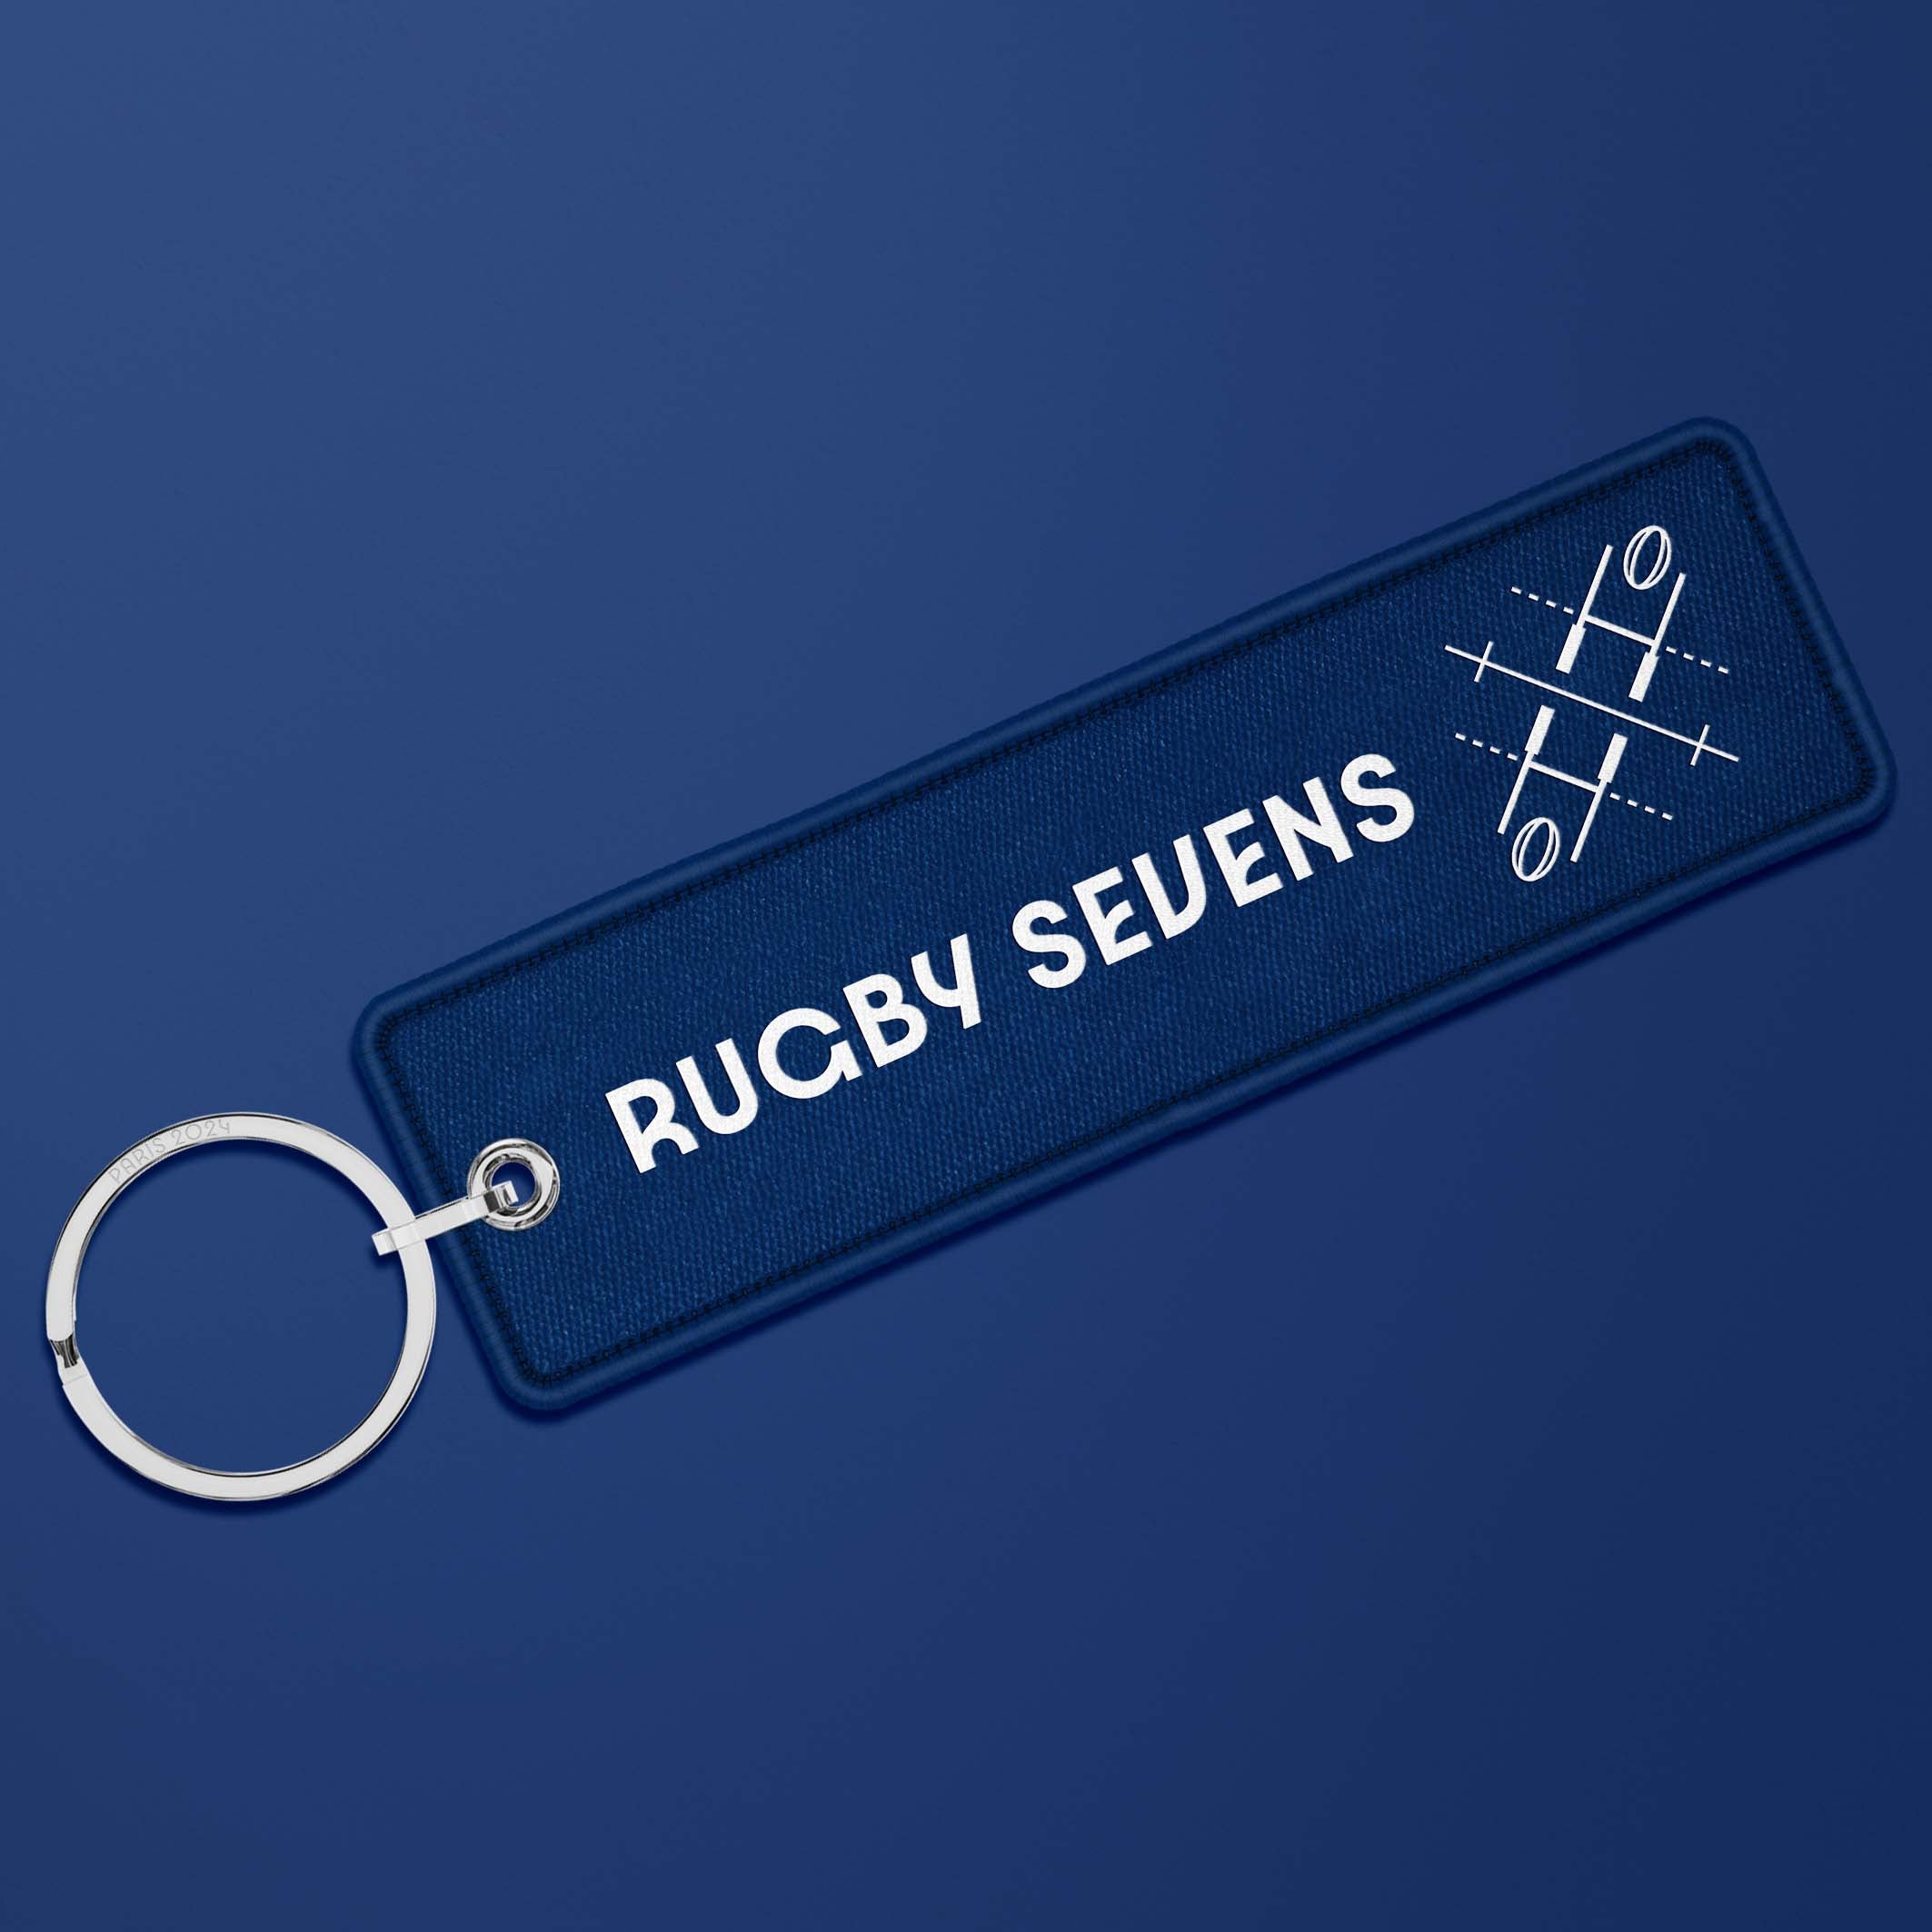 Paris 2024 French blue flame key ring - 7th Rugby